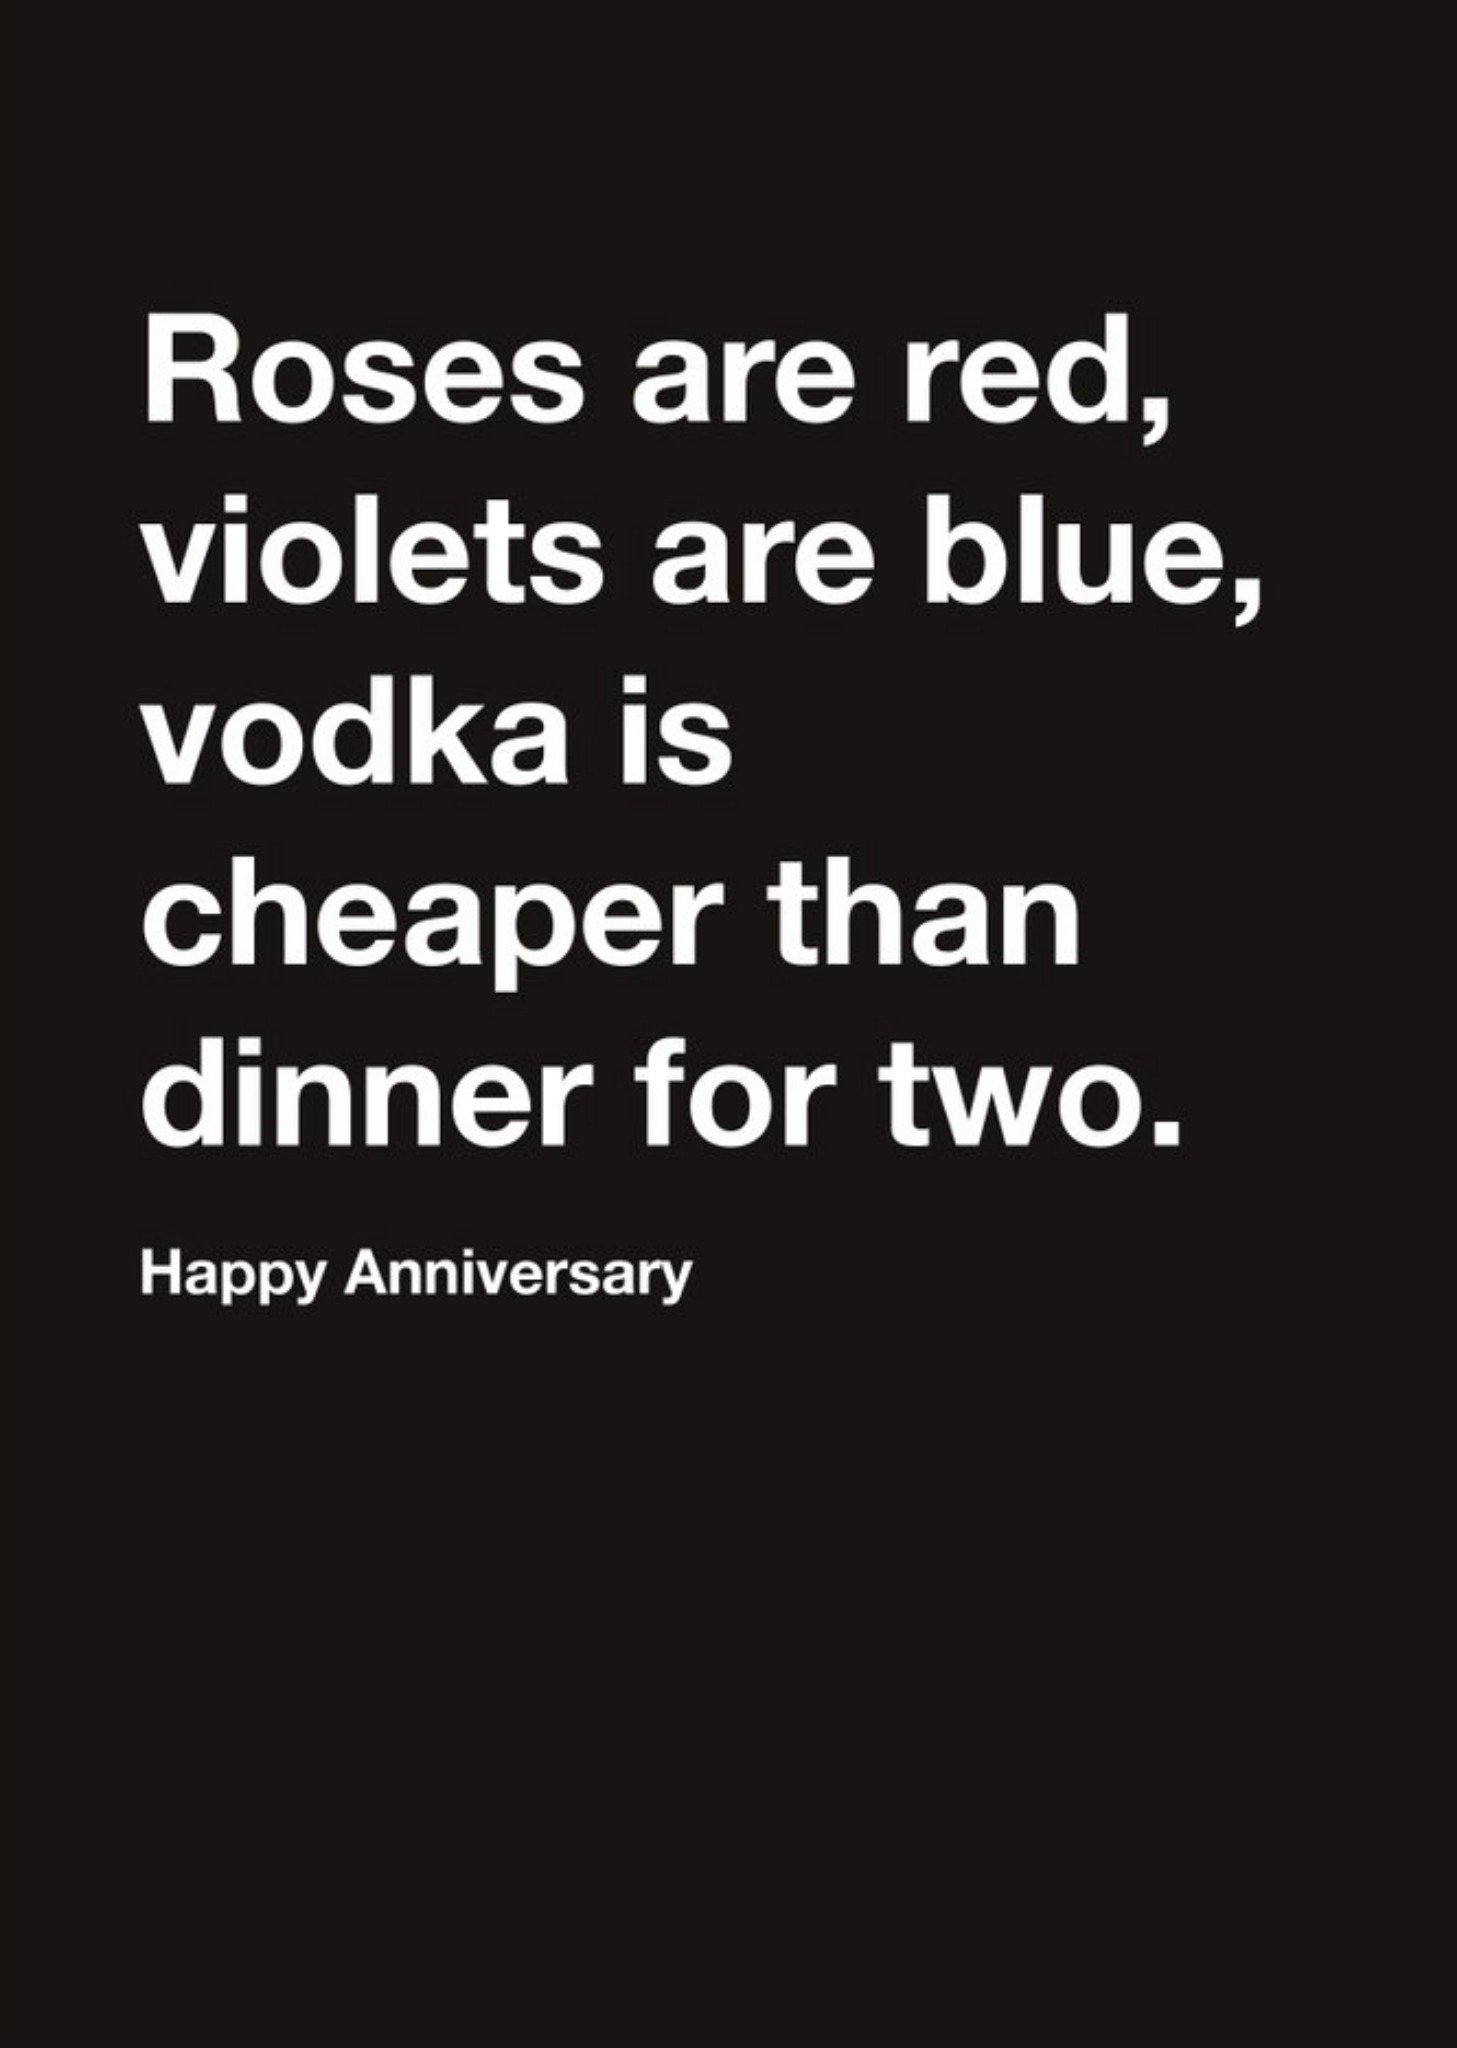 Moonpig Carte Blanche Roses Are Red, Vodka Is Cheaper Than Dinner For Two Happy Anniversary Card, La